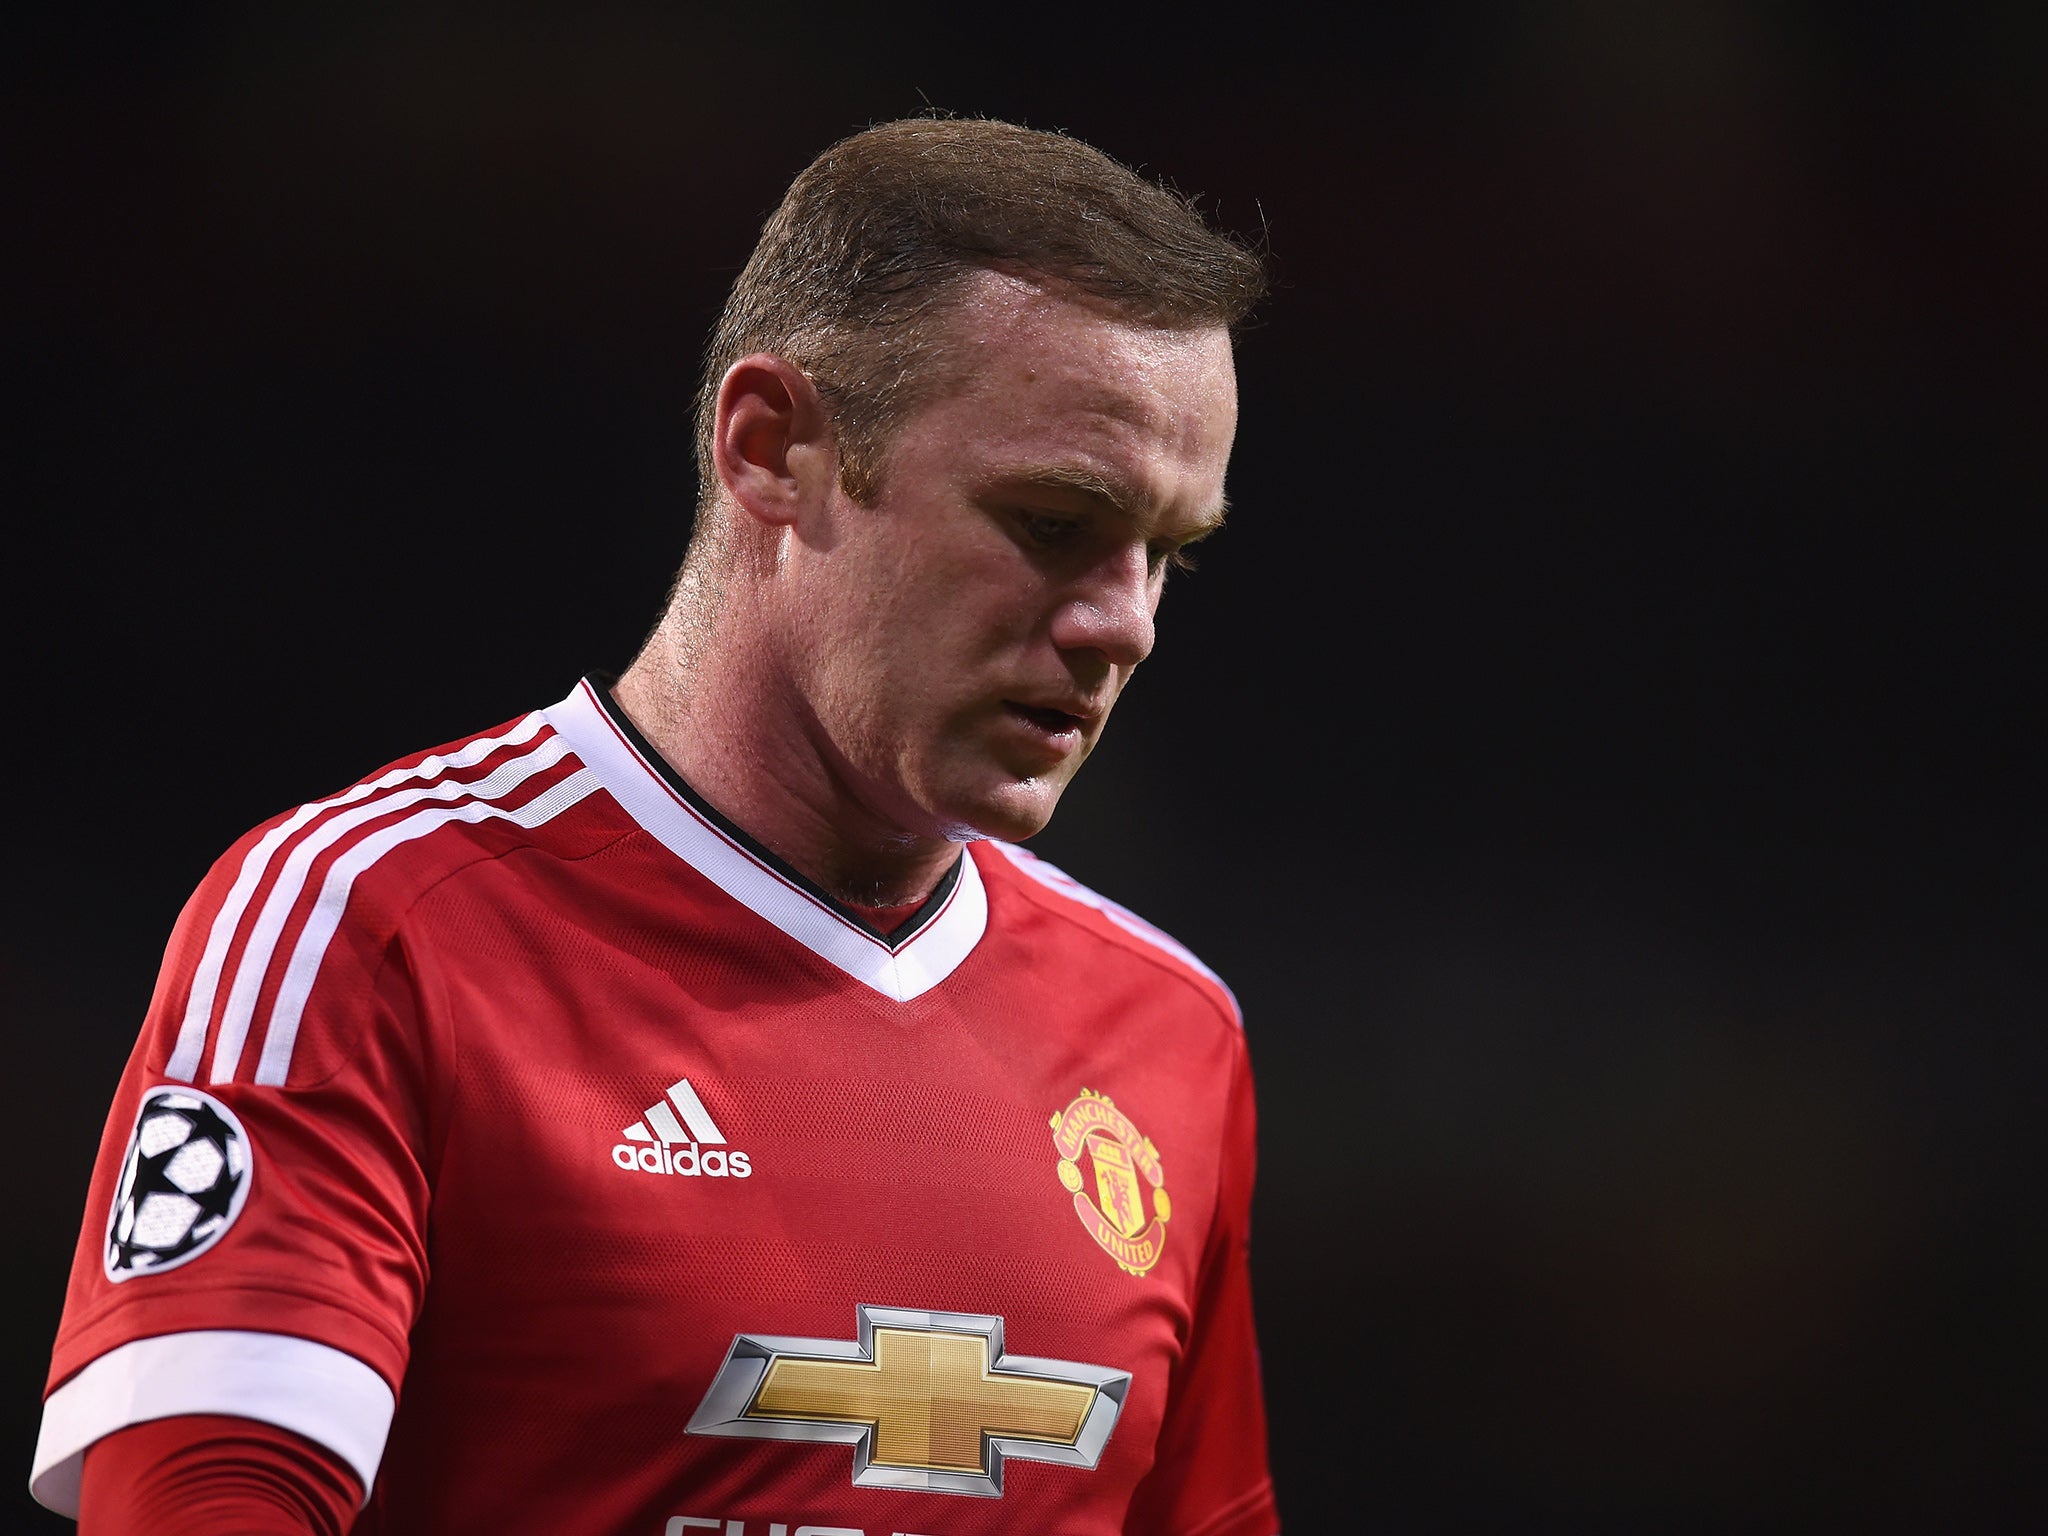 A downbeat Wayne Rooney during Manchester United's 0-0 draw with PSV Eindhoven